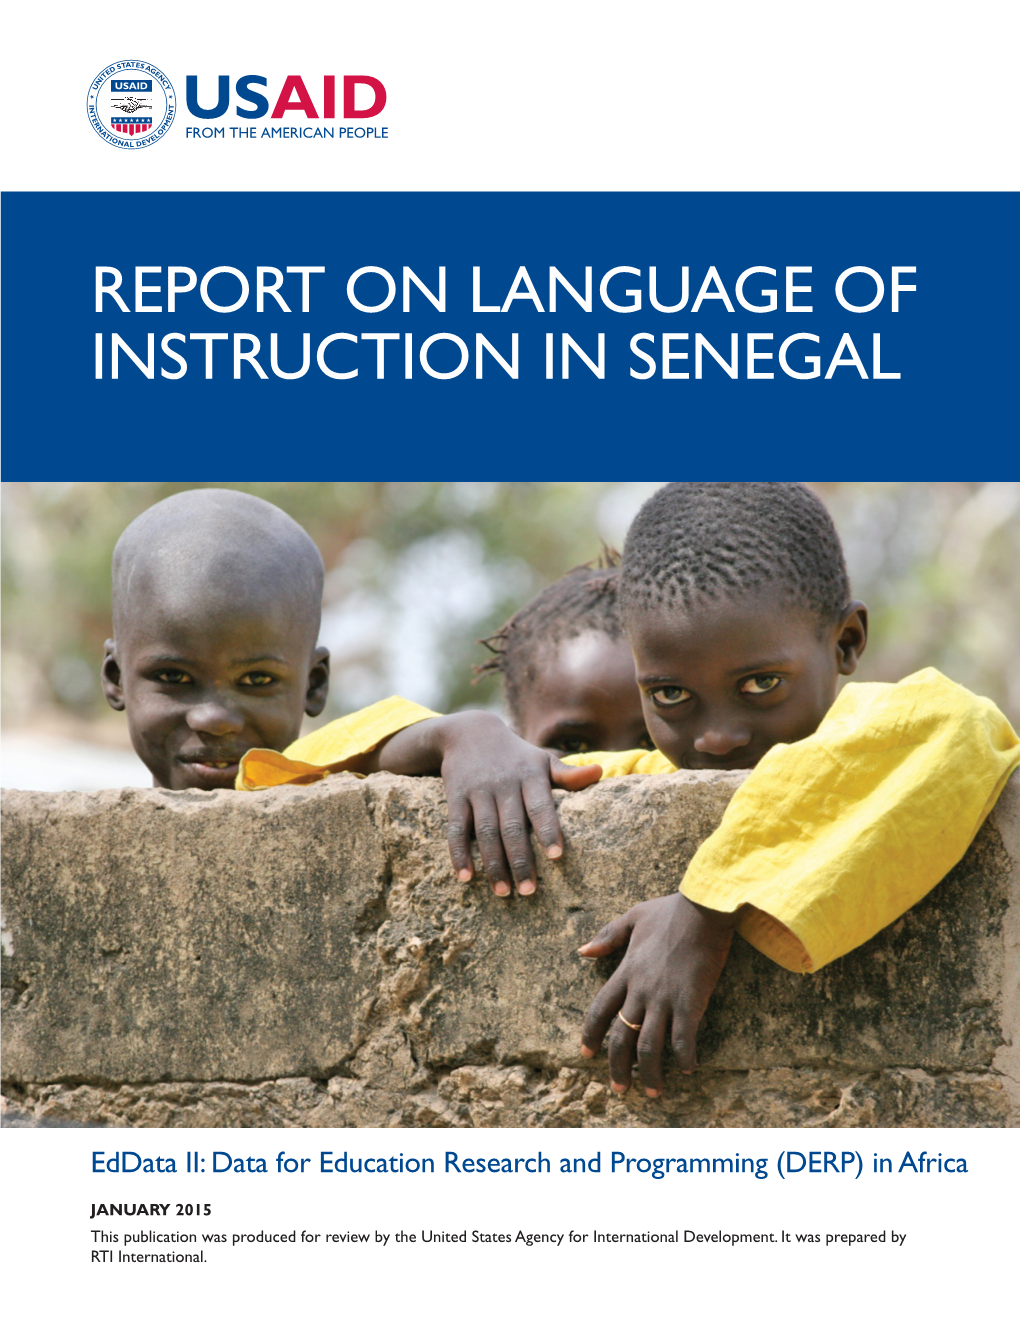 Report on Language of Instruction in Senegal